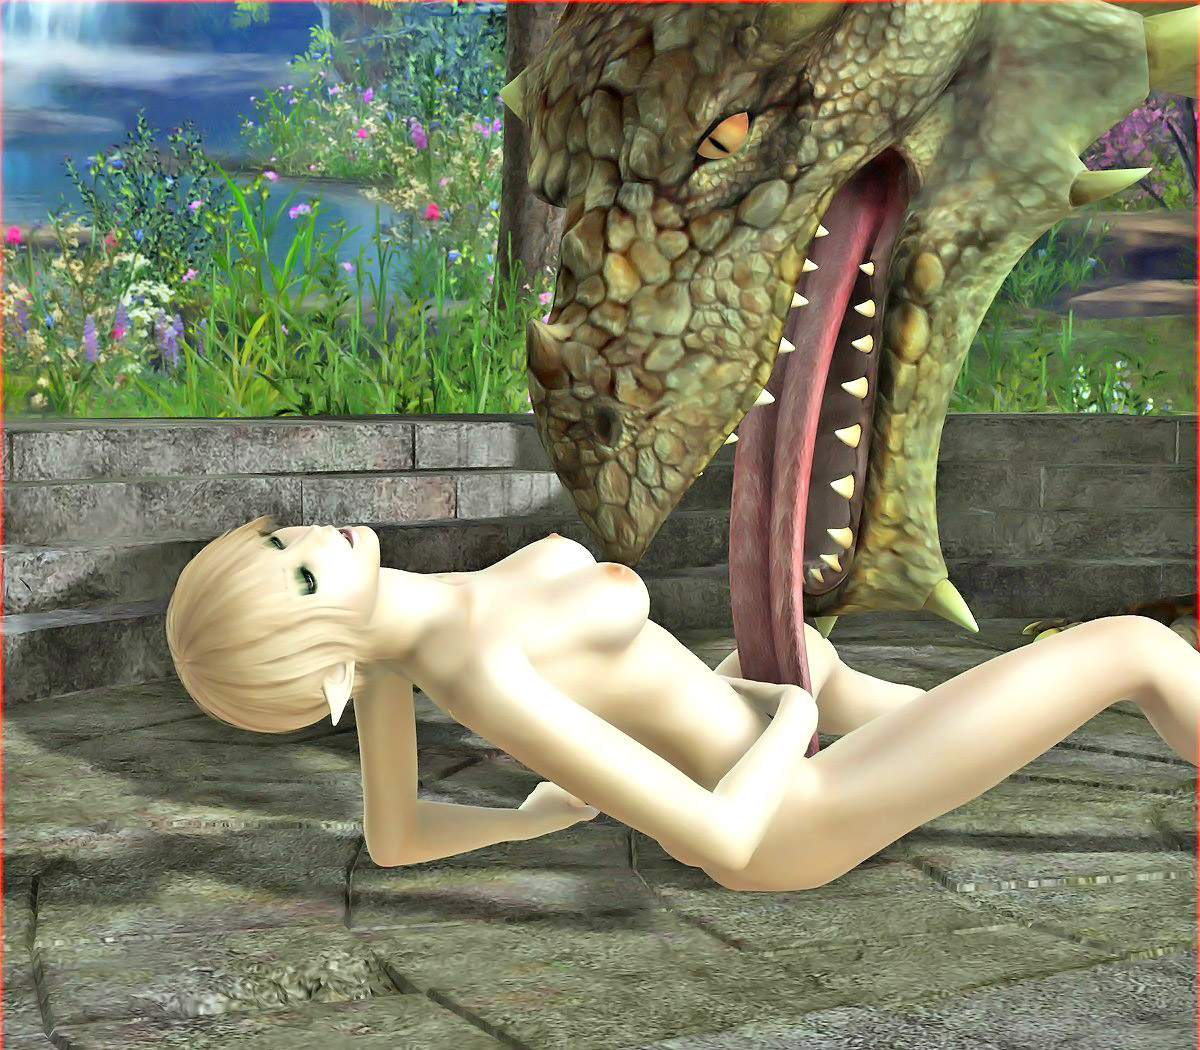 Long Tongue 3d Porn - 3D elf babe getting her pussy licked by dragons gigantic tongue | Porncraft  3d